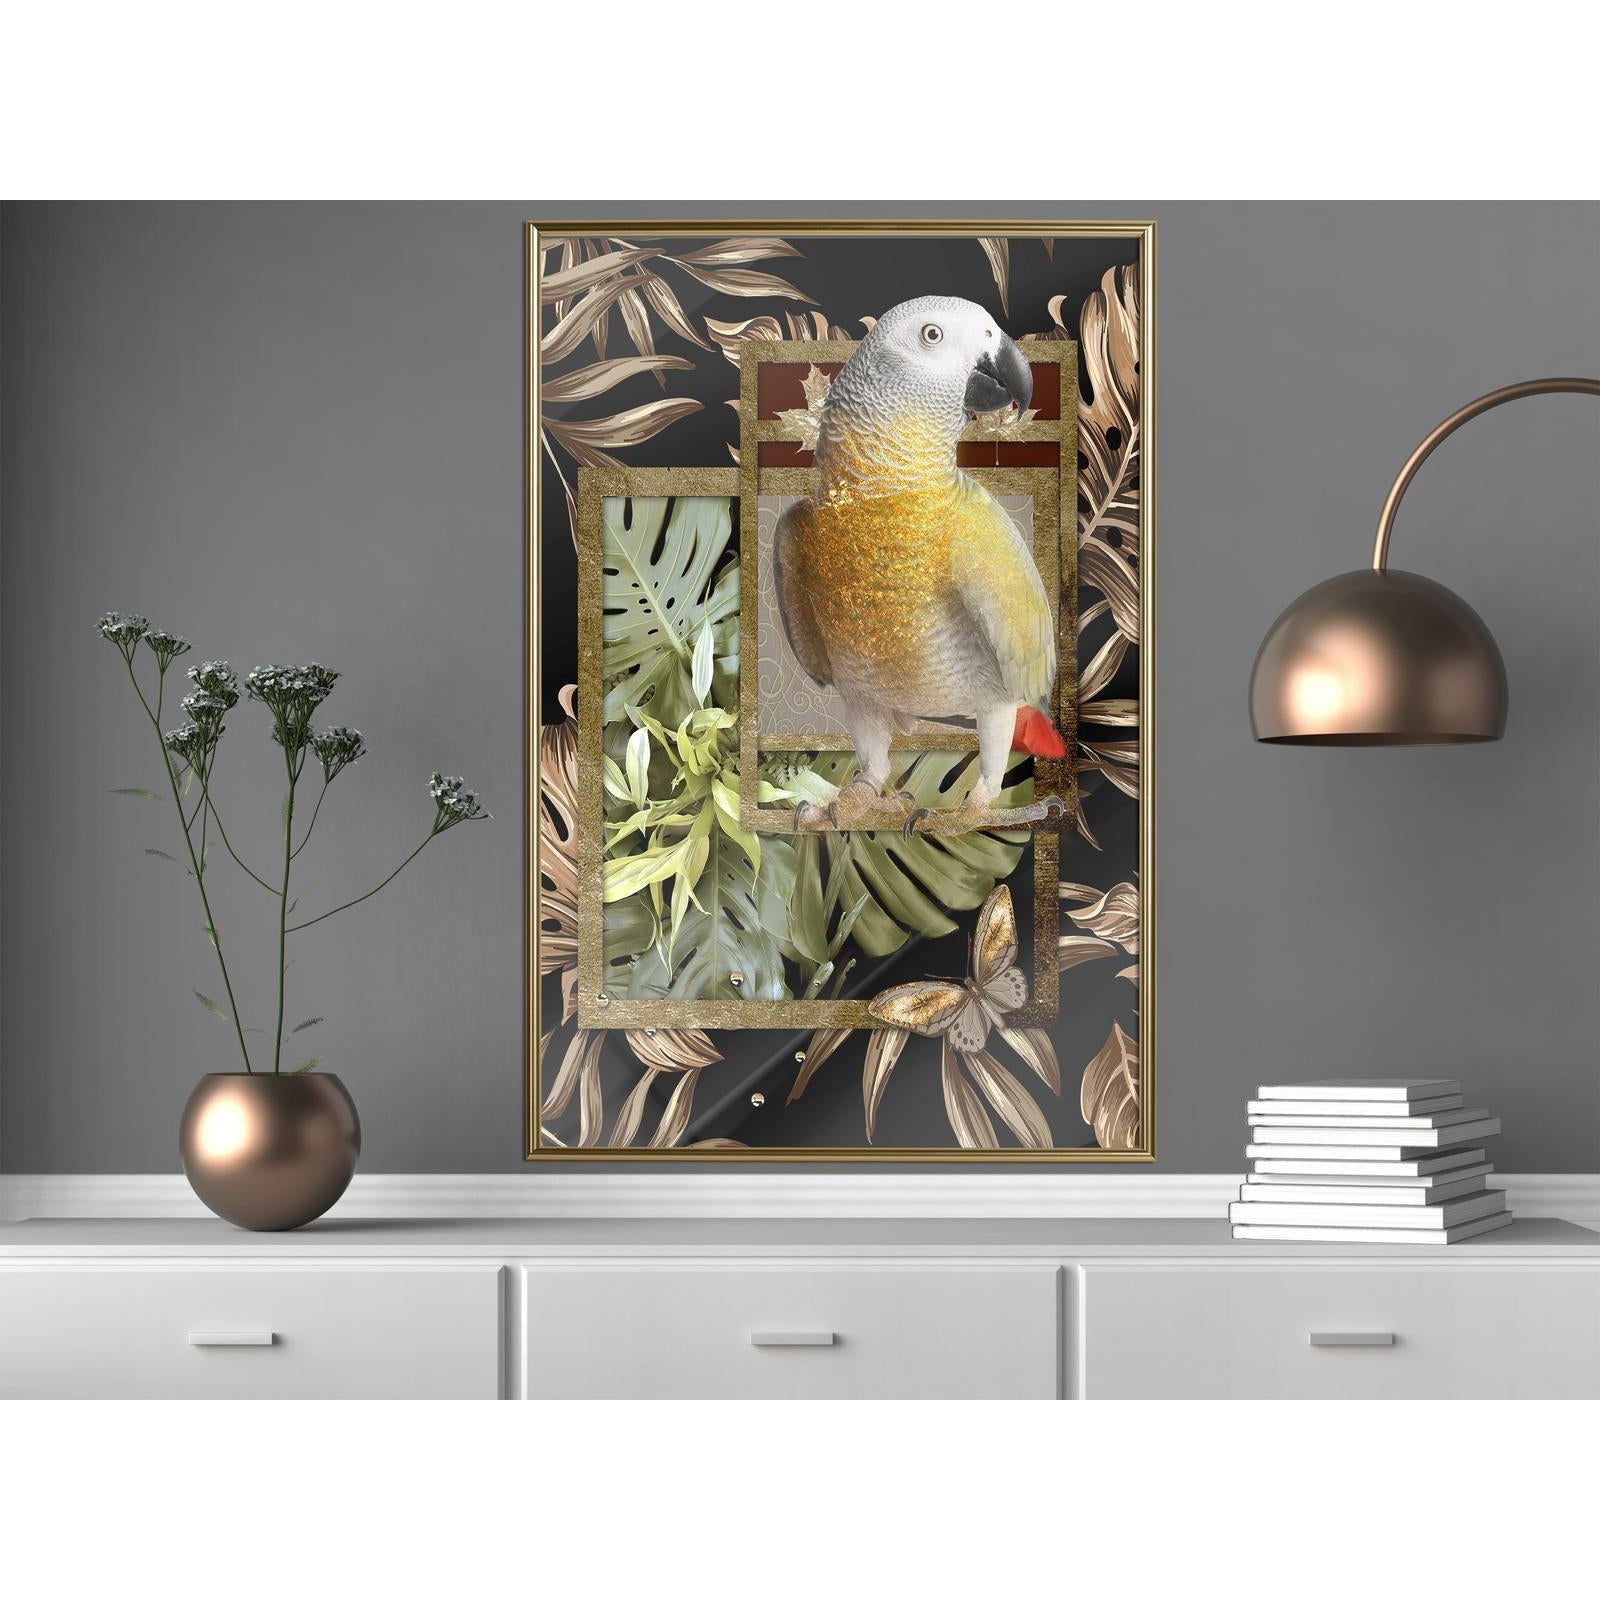 Inramad Poster / Tavla - Composition with Gold Parrot-Poster Inramad-Artgeist-peaceofhome.se